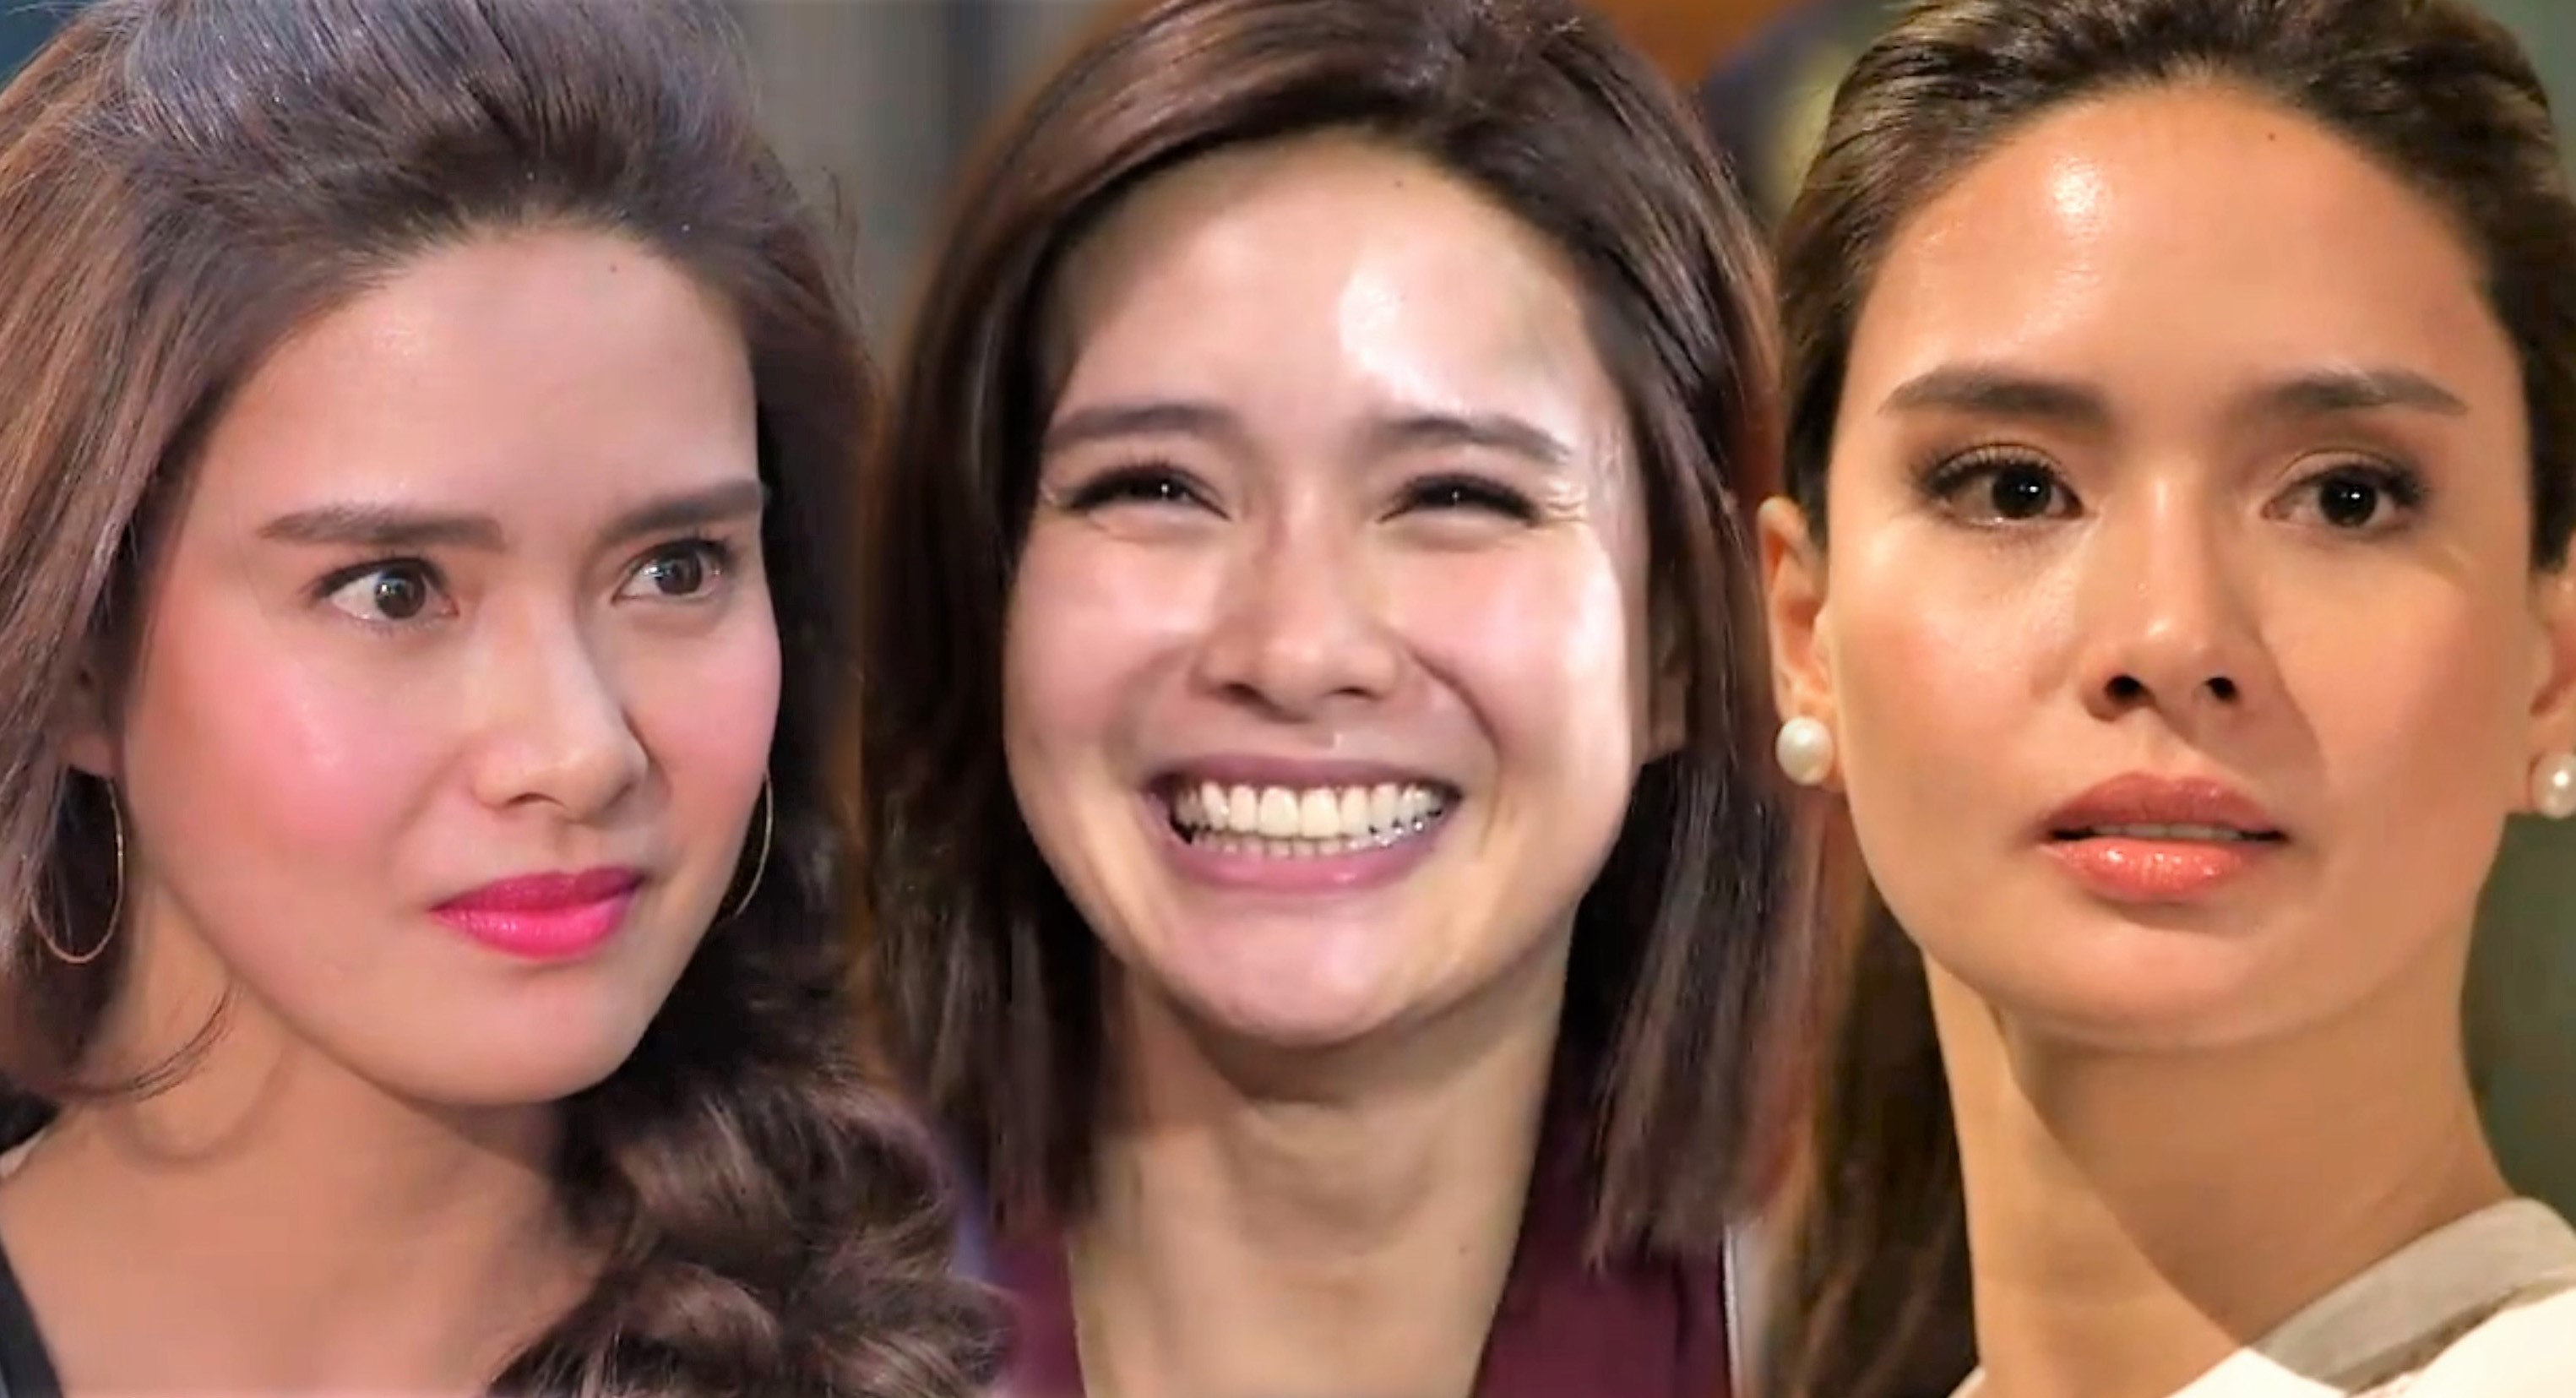 ...Kazakhstan.Starring Erich Gonzales, The Blood Sisters revolves around tr...